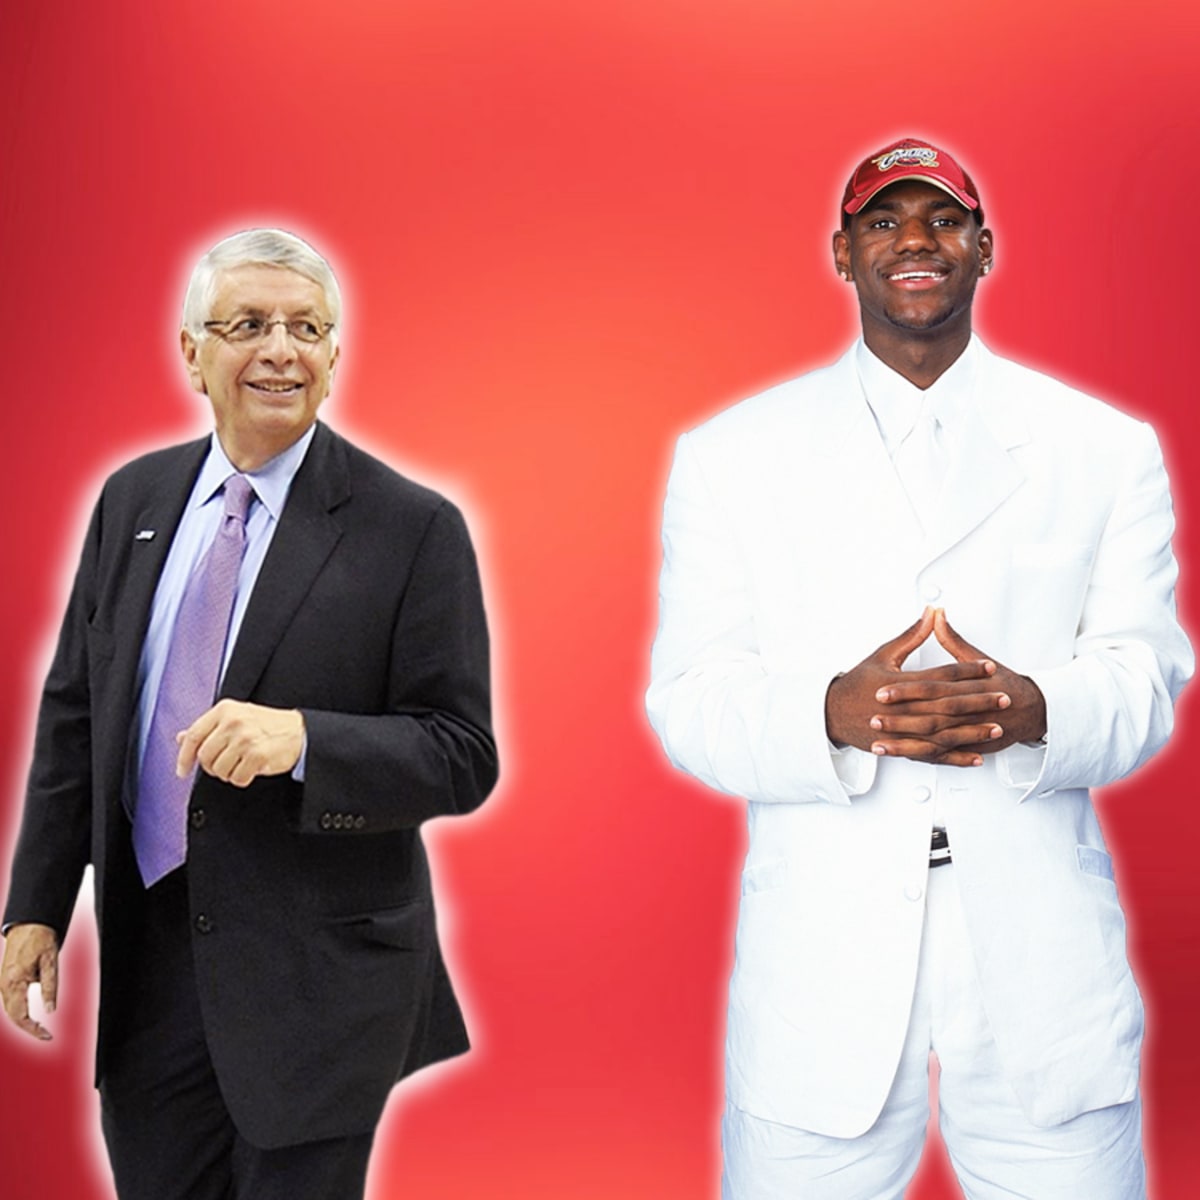 How does David Stern look? 😂👔 Back in 2003 he tried on #LeBron's dra